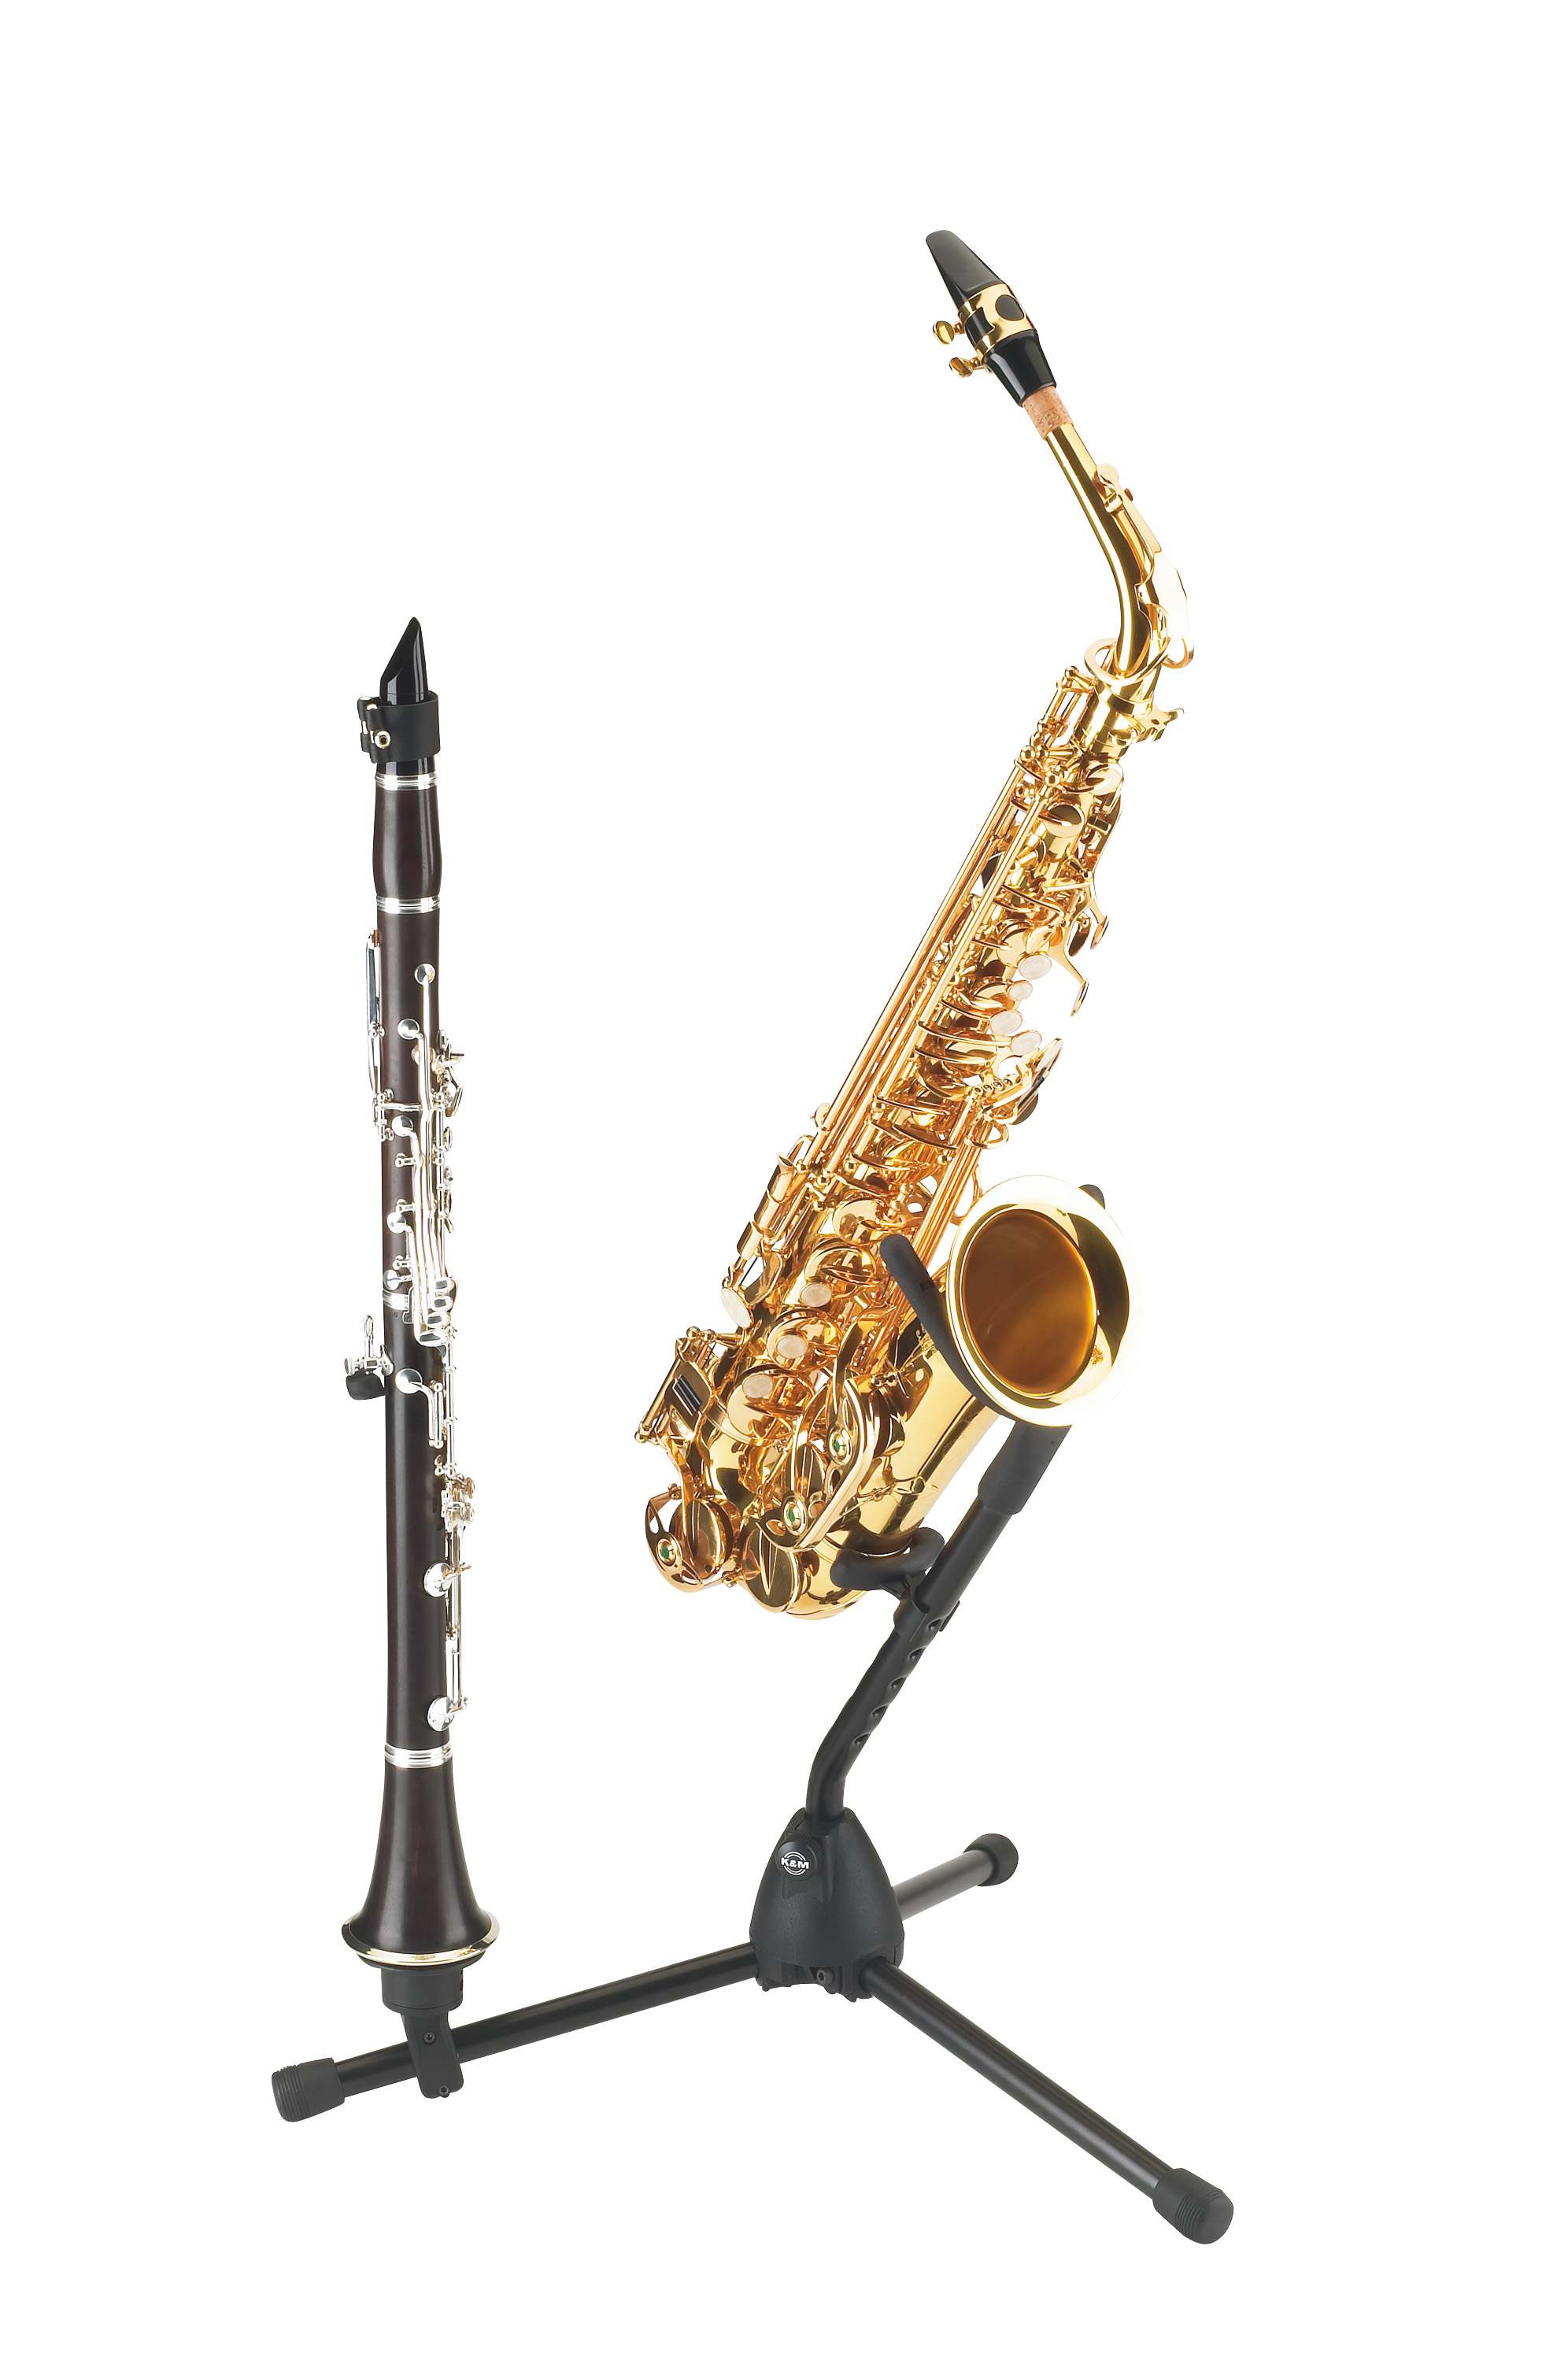 with 2 Detachable Pegs for Flute and Clarinet Peg Black Eastar EST-004 Portable Alto Saxophone Stand Alto Sax 3 in 1 